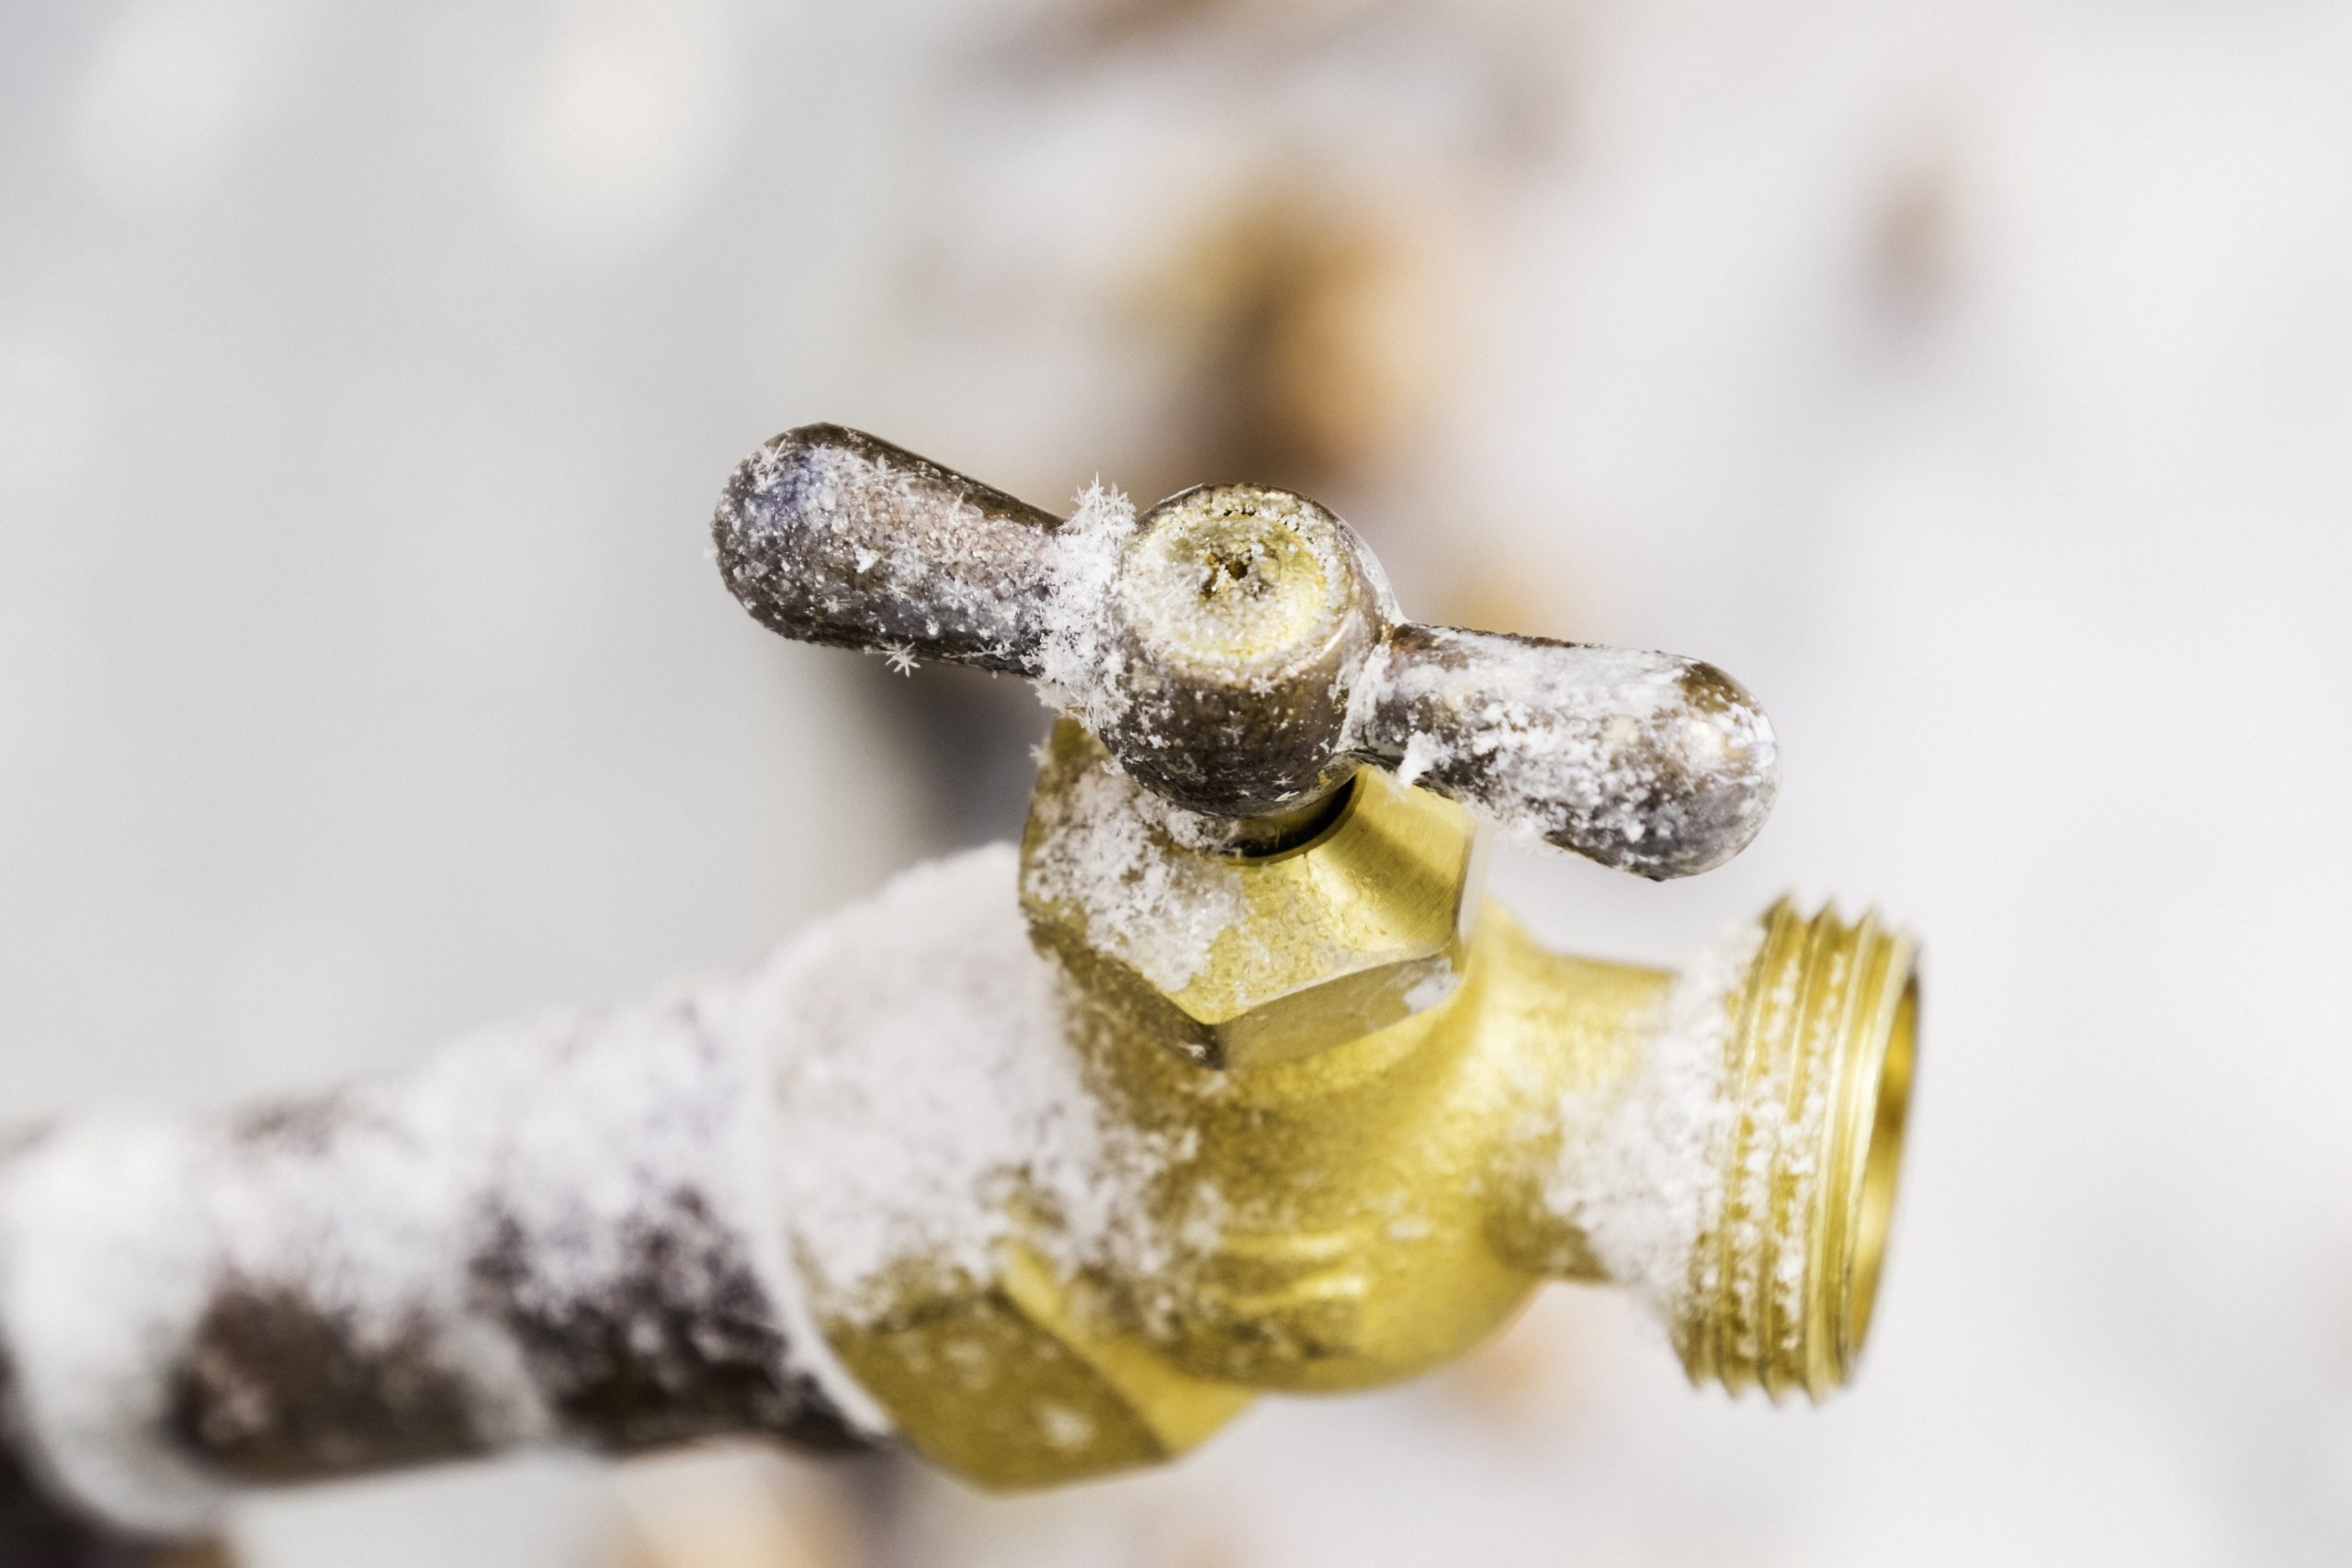 How to Keep Pipes from Freezing